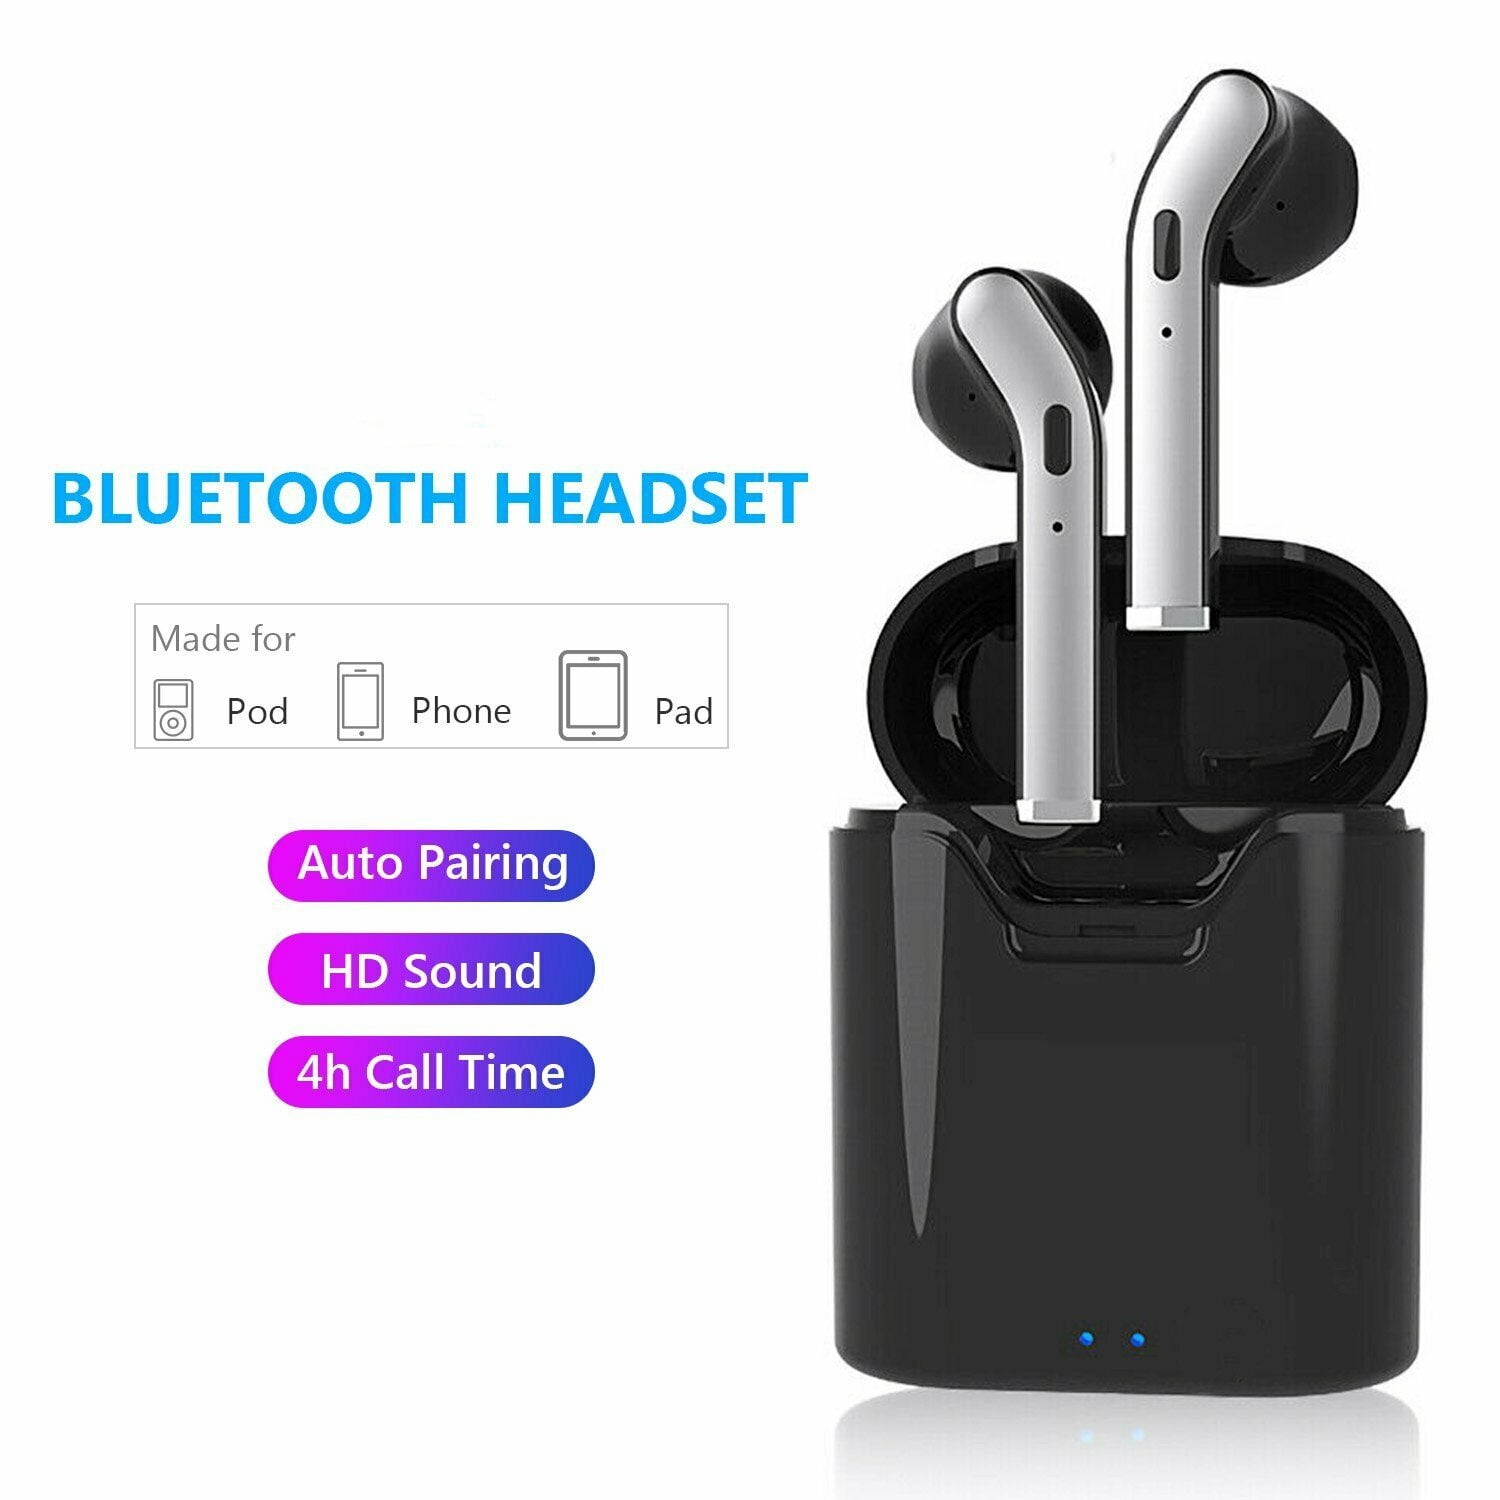 iPhone Bluetooth headset wireless Bluetooth earbuds stereo headset cordless sports headset Bluetooth in-ear headphones built-in microphone for Apple Airpods Android